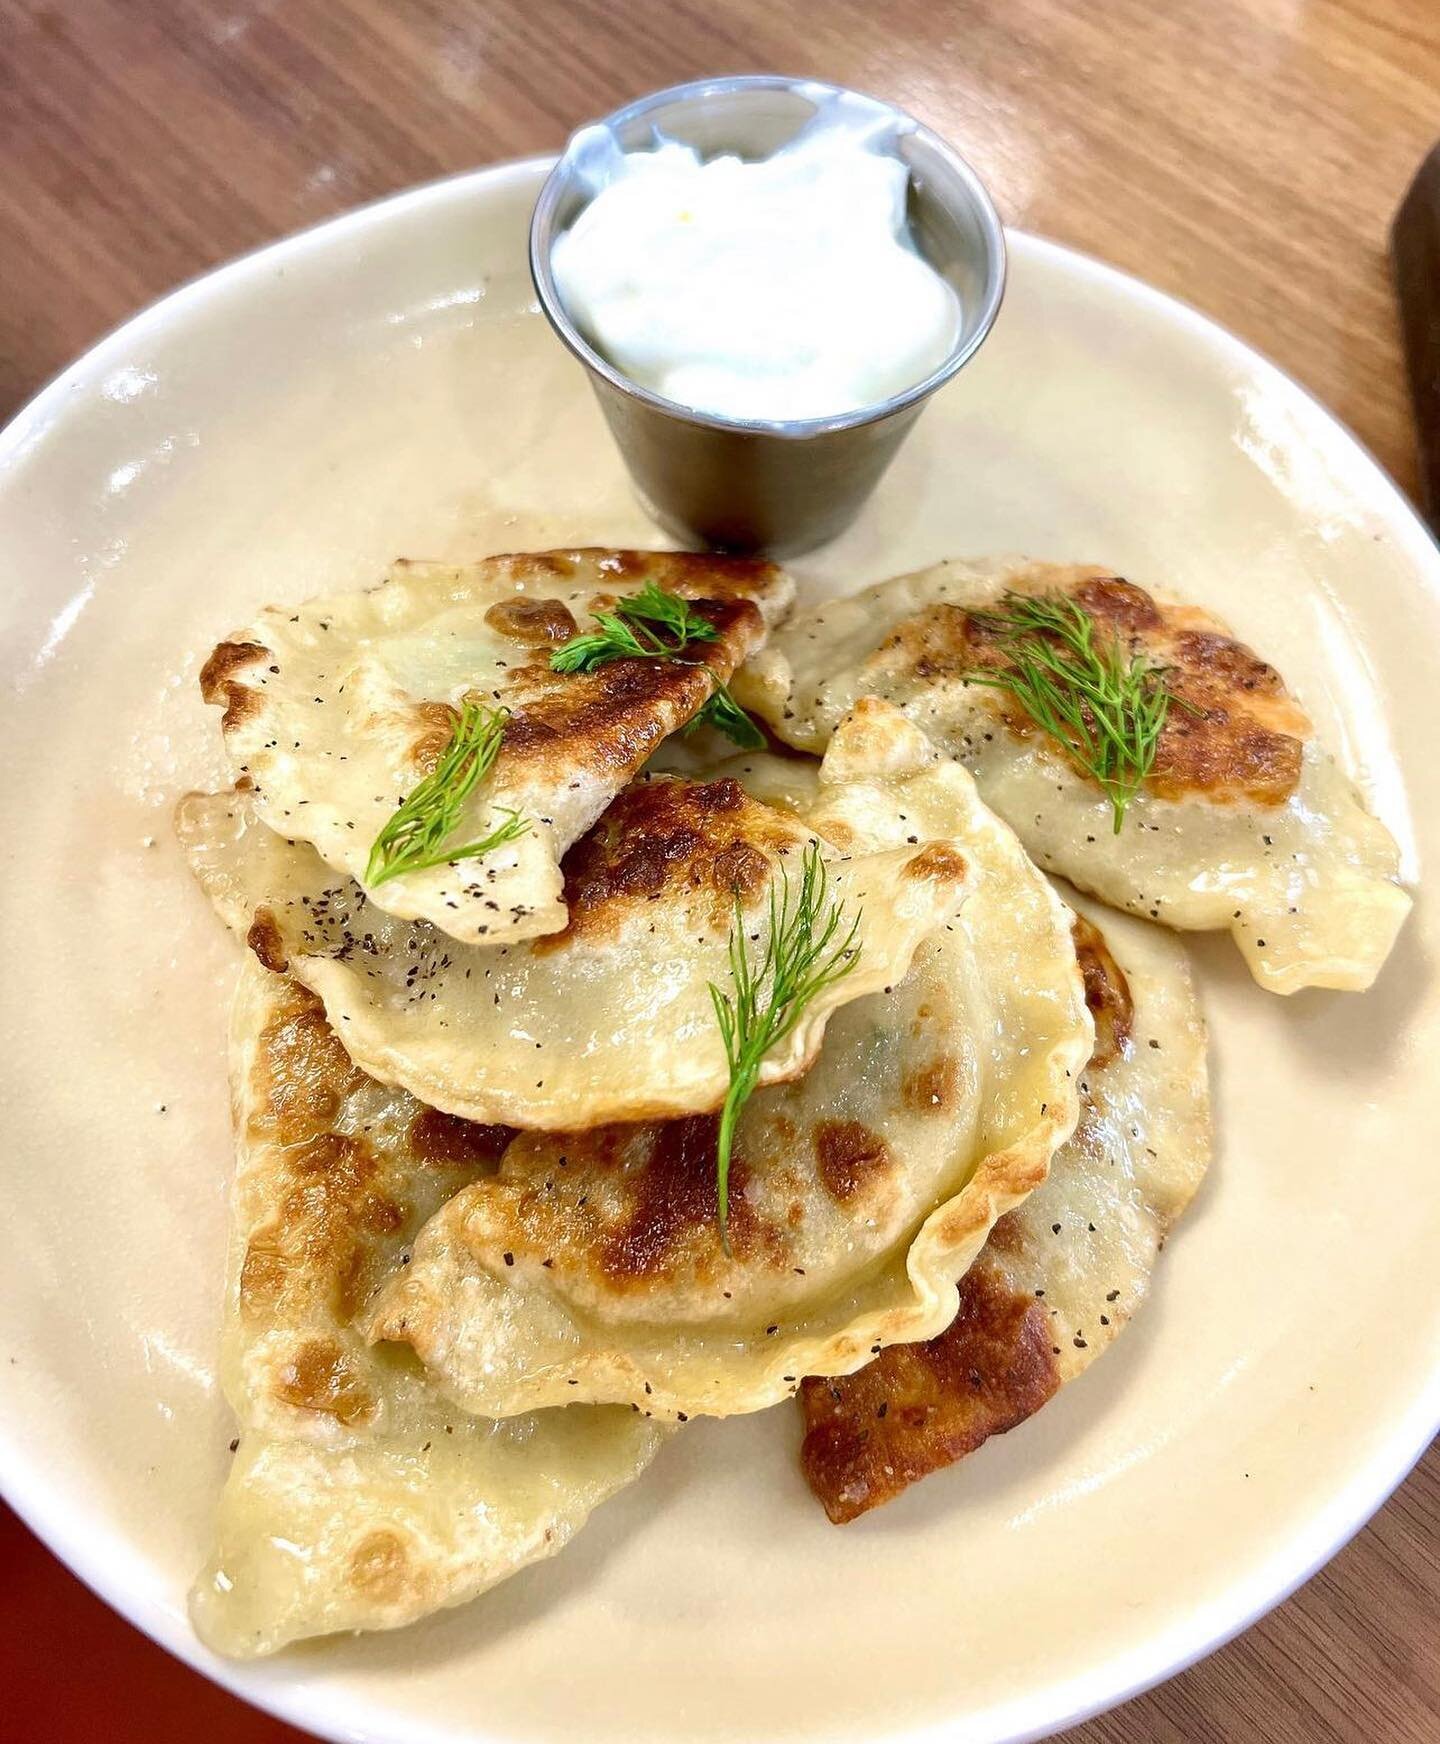 No words, just pierogis 🥟 🔥

Find out more on how you can order locally made pierogis right here in Costa Mesa at @pierogirulezoc!

#thehoodkitchen 

#pierogis #costamesaeats #supportlocal #localbusiness #goodeats #foodfeed